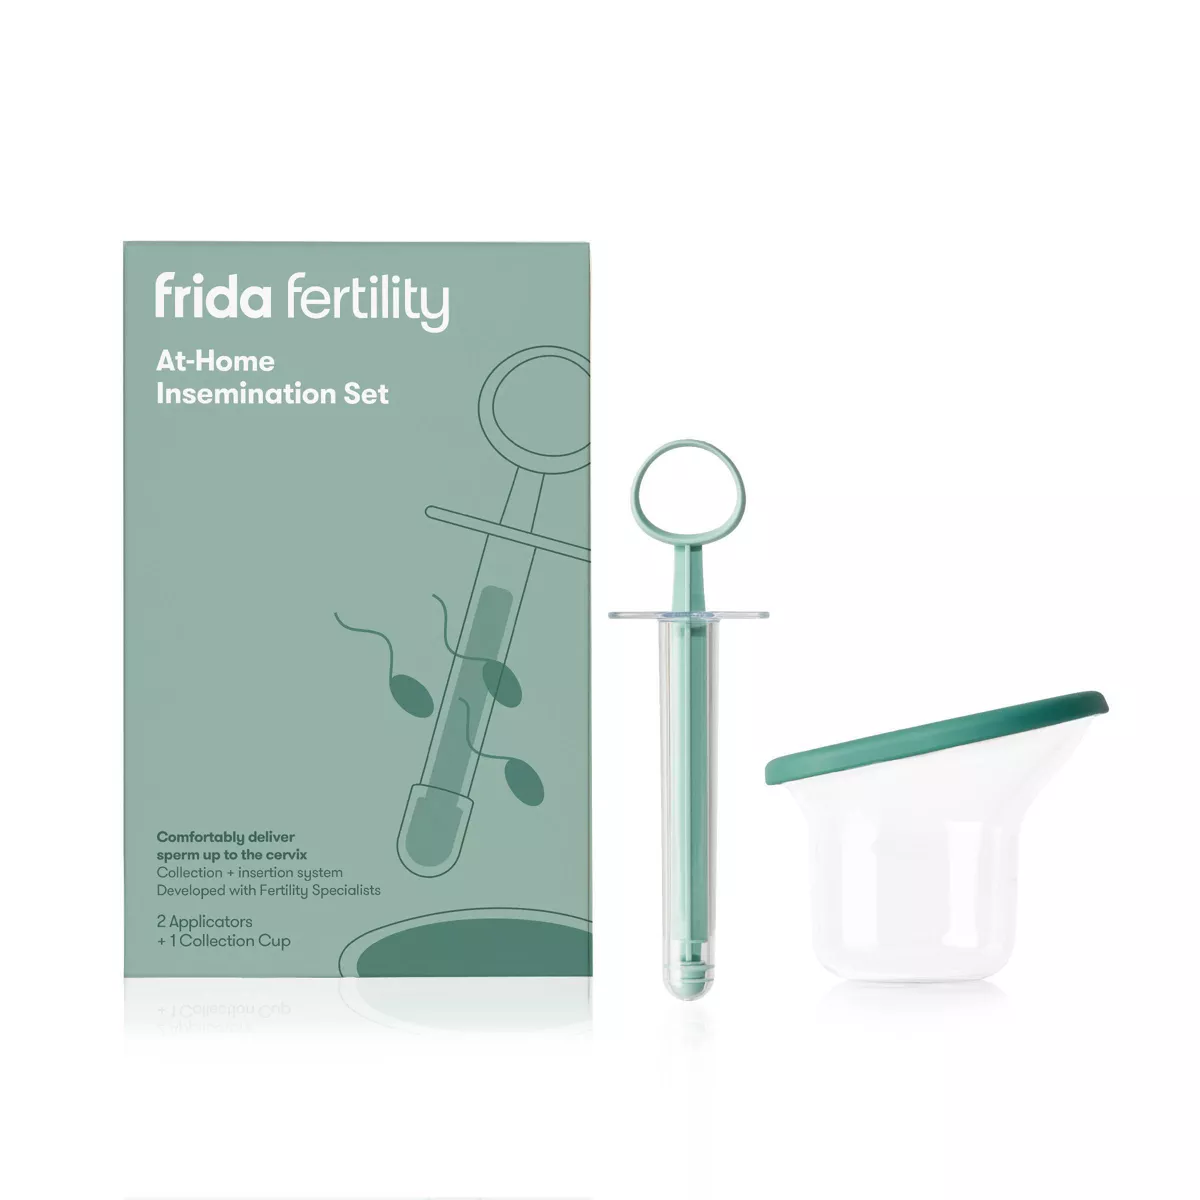 Frida Fertility Intracervical Insemination Kit designed for frozen or low volume sperm, displayed to highlight its user-friendly and effective approach to supporting conception.